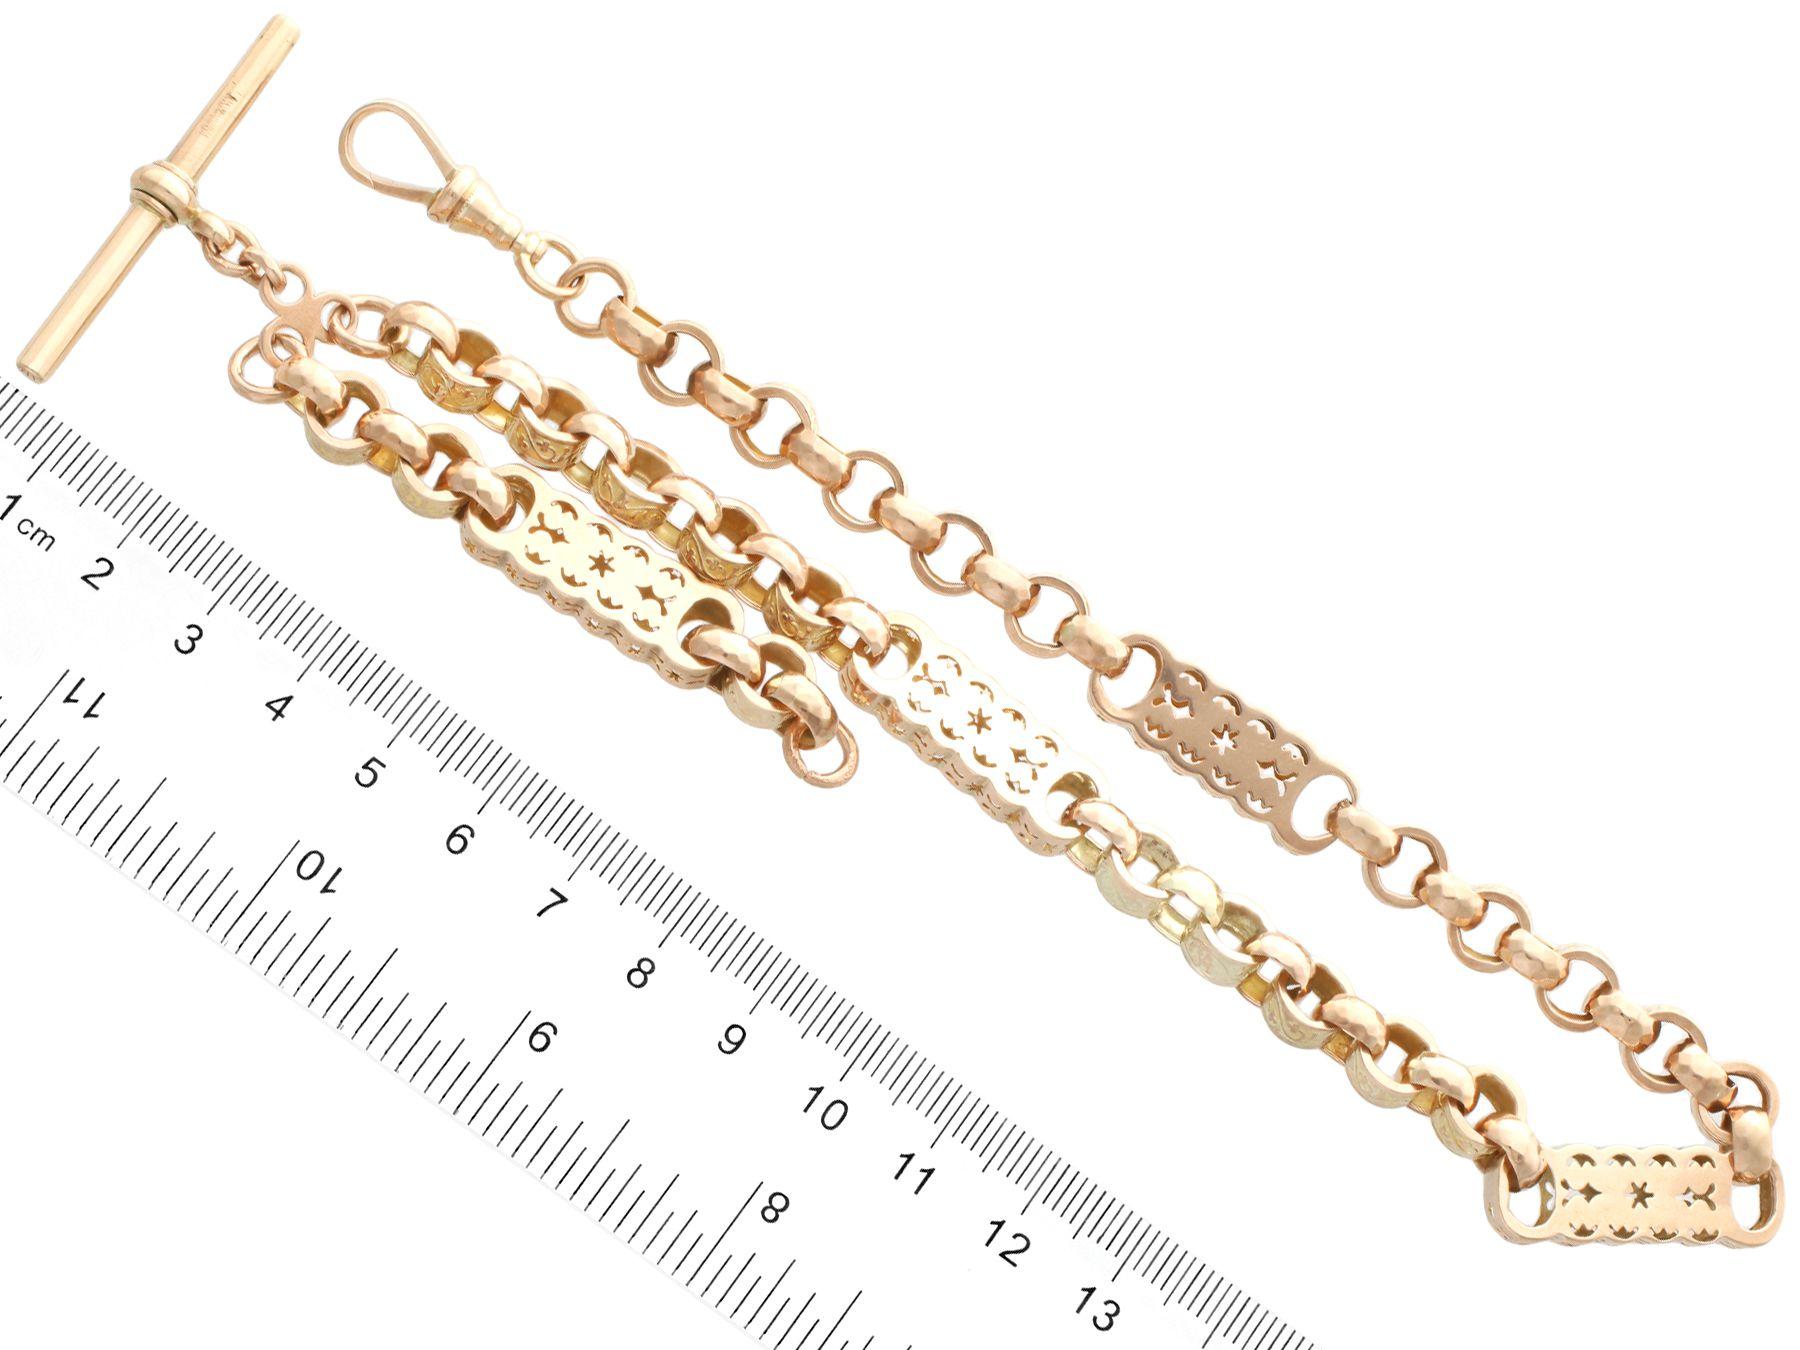 Antique 9 Carat Yellow Gold Watch Chain For Sale 3